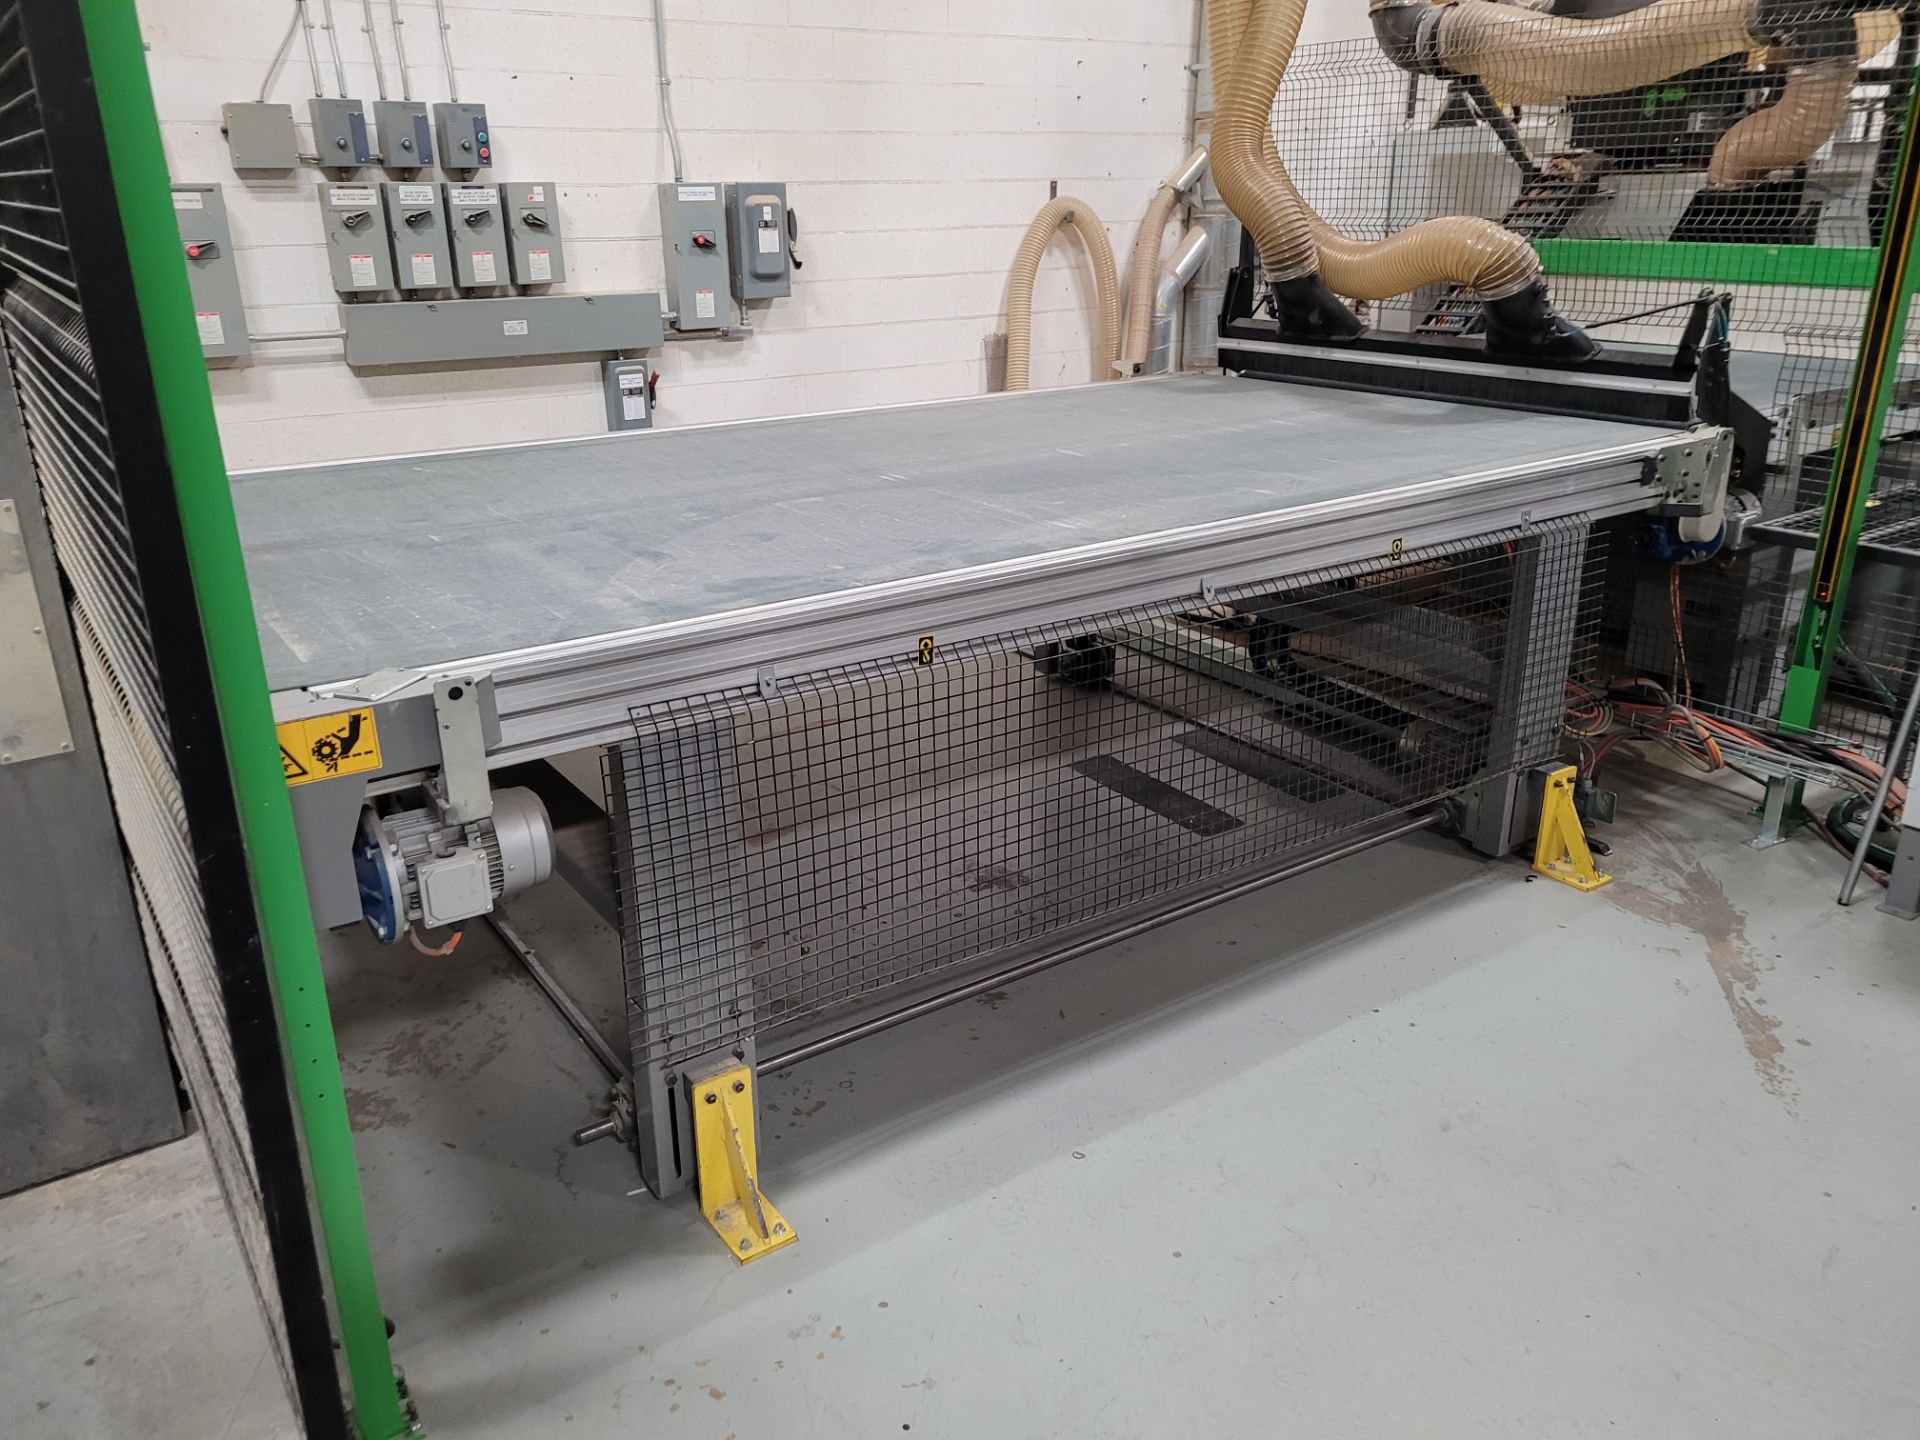 2011 BIESSE Flat Table CNC Router mod. Rover-A-22-31-GFT, 2200mm x 3100mm, ser. 45941 w/ CNC Control - Image 6 of 8